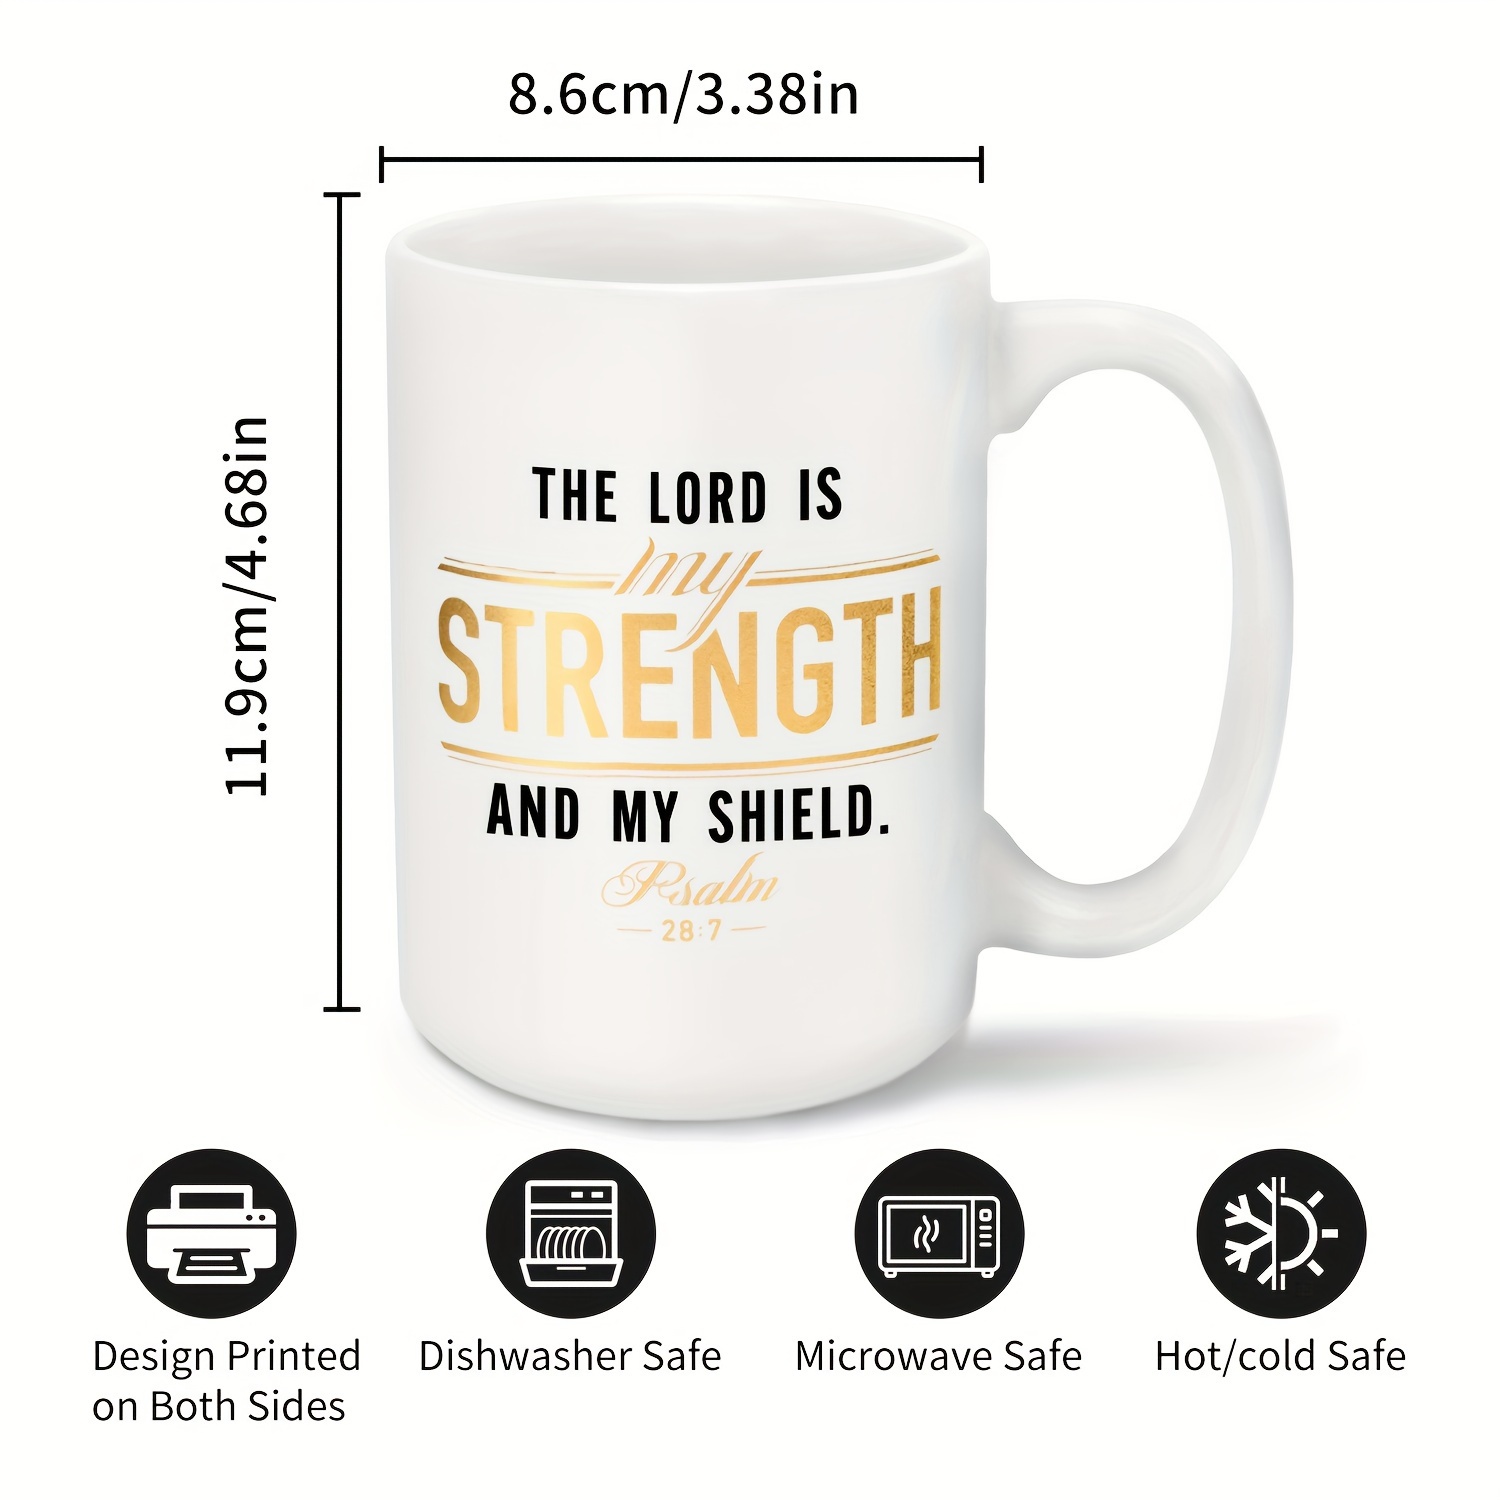 Bible Verse Tumbler with Inspirational Thoughts and Prayers